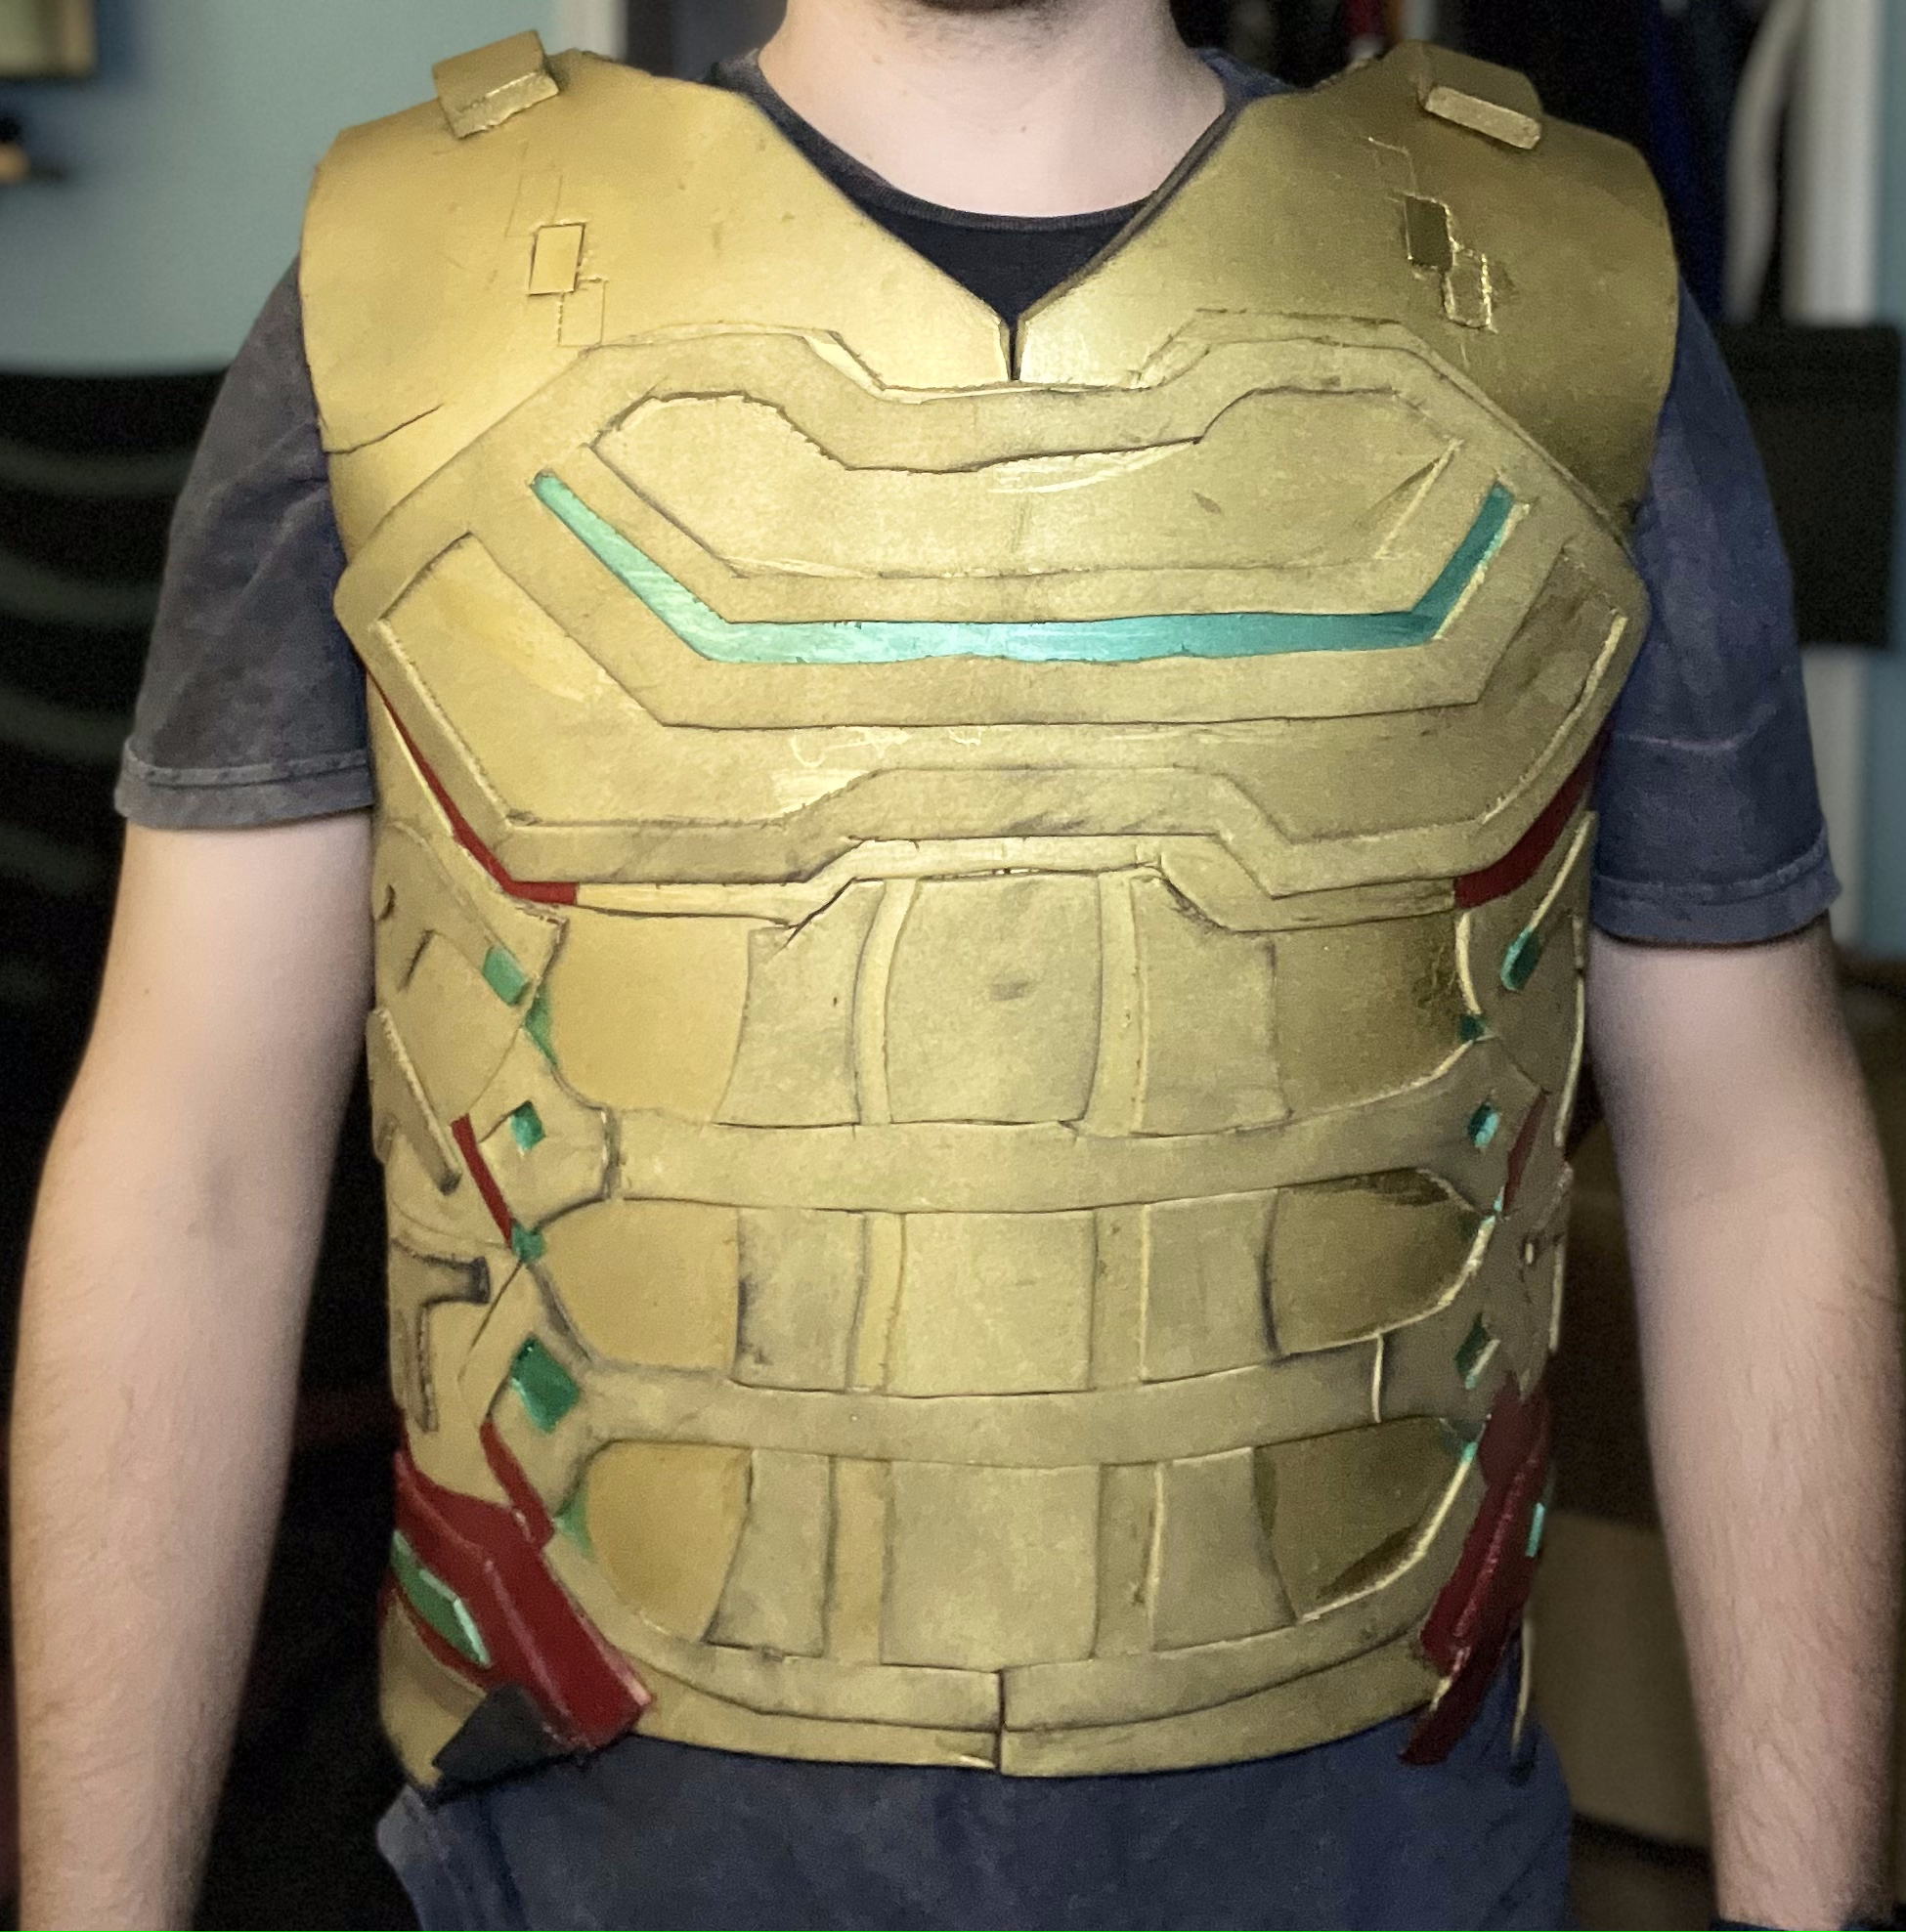 The Mysterio Chestplate on Stephen